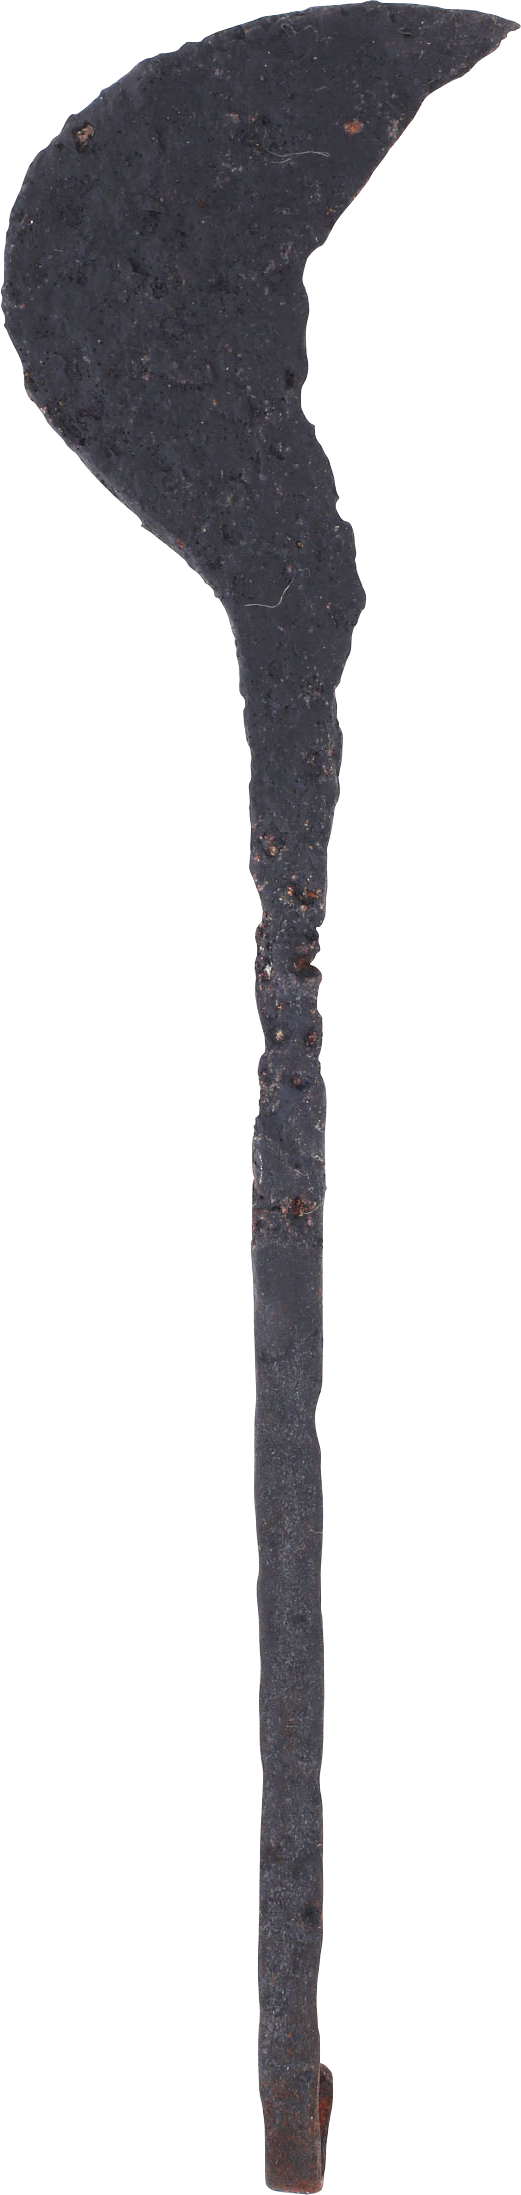 VIKING AGRICULTURAL SICKLE, 866-1067 AD